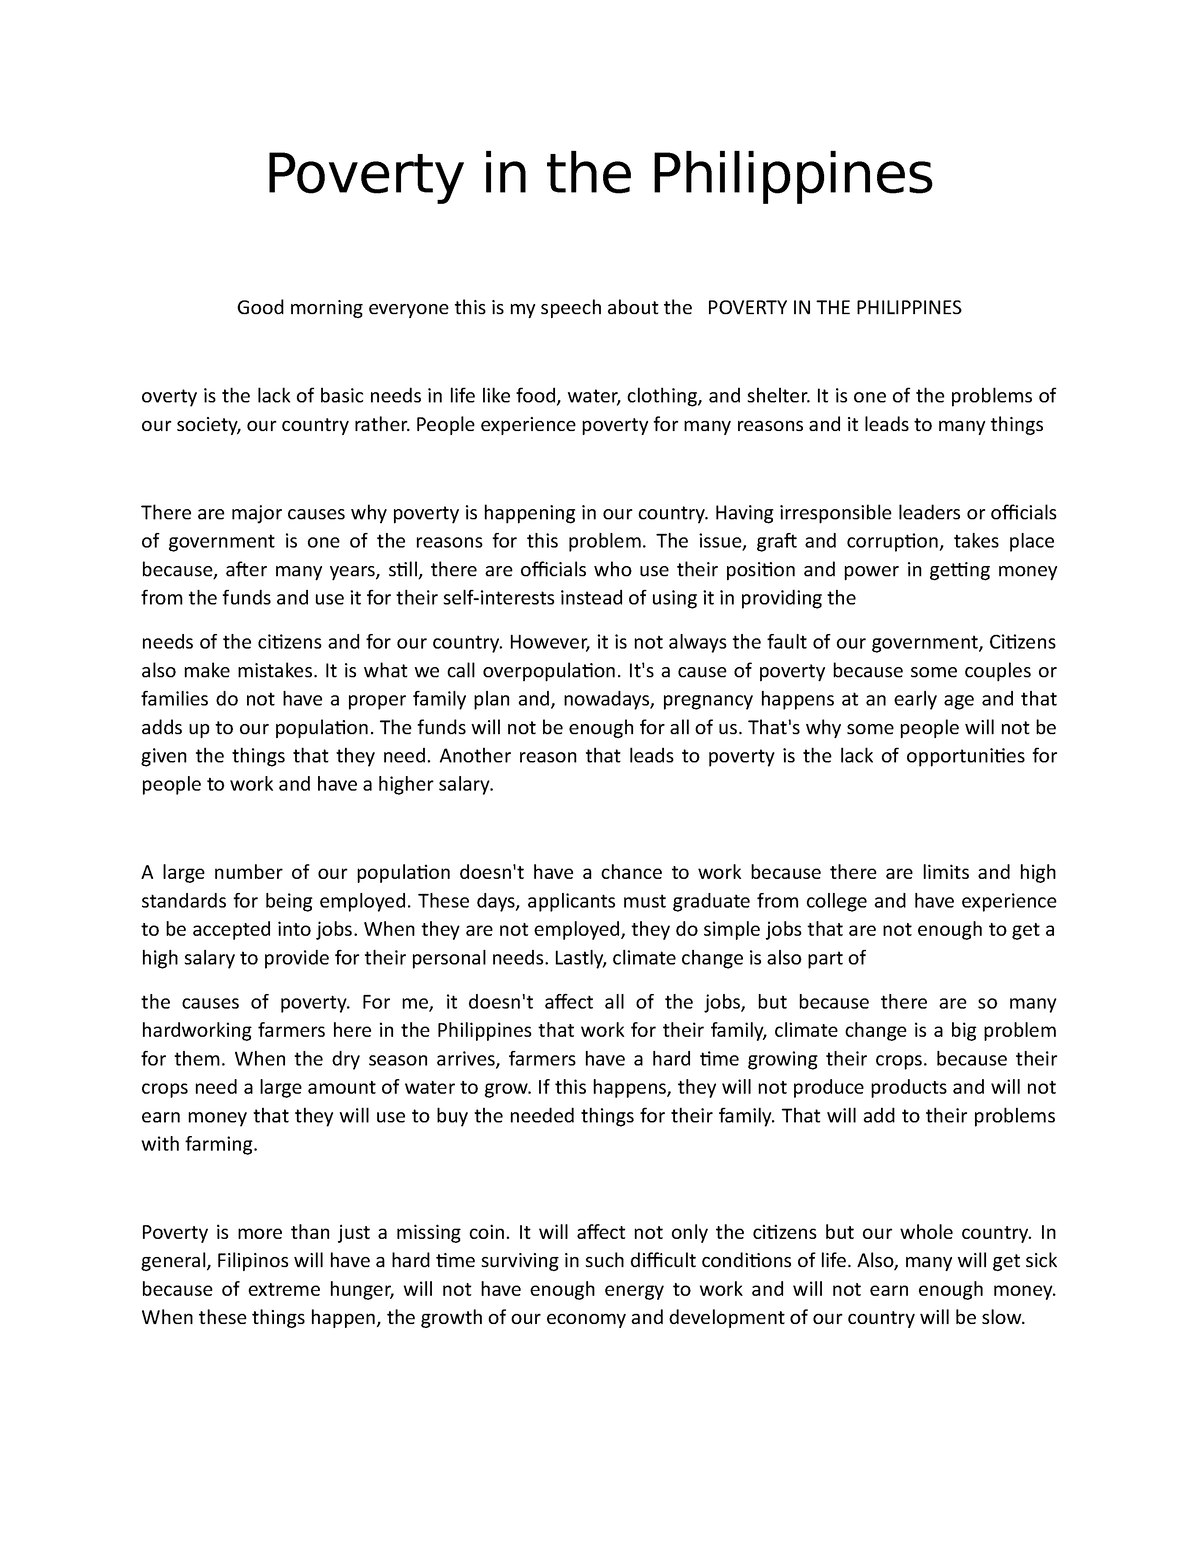 essay poverty in the philippines